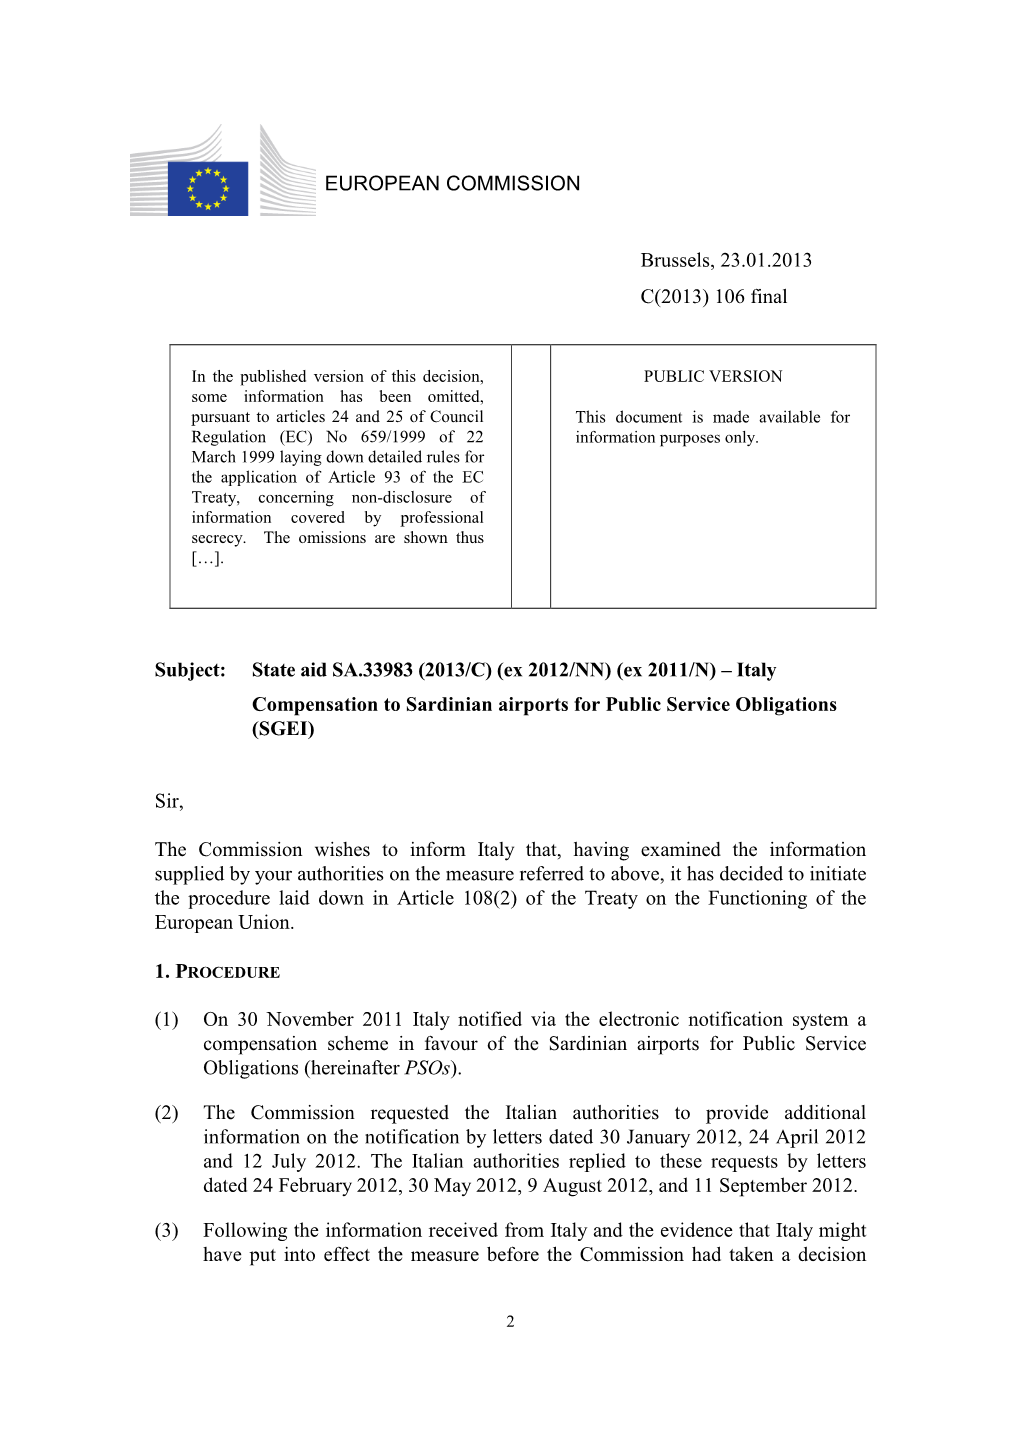 State Aid SA.33983 (2013/C) (Ex 2012/NN) (Ex 2011/N) – Italy Compensation to Sardinian Airports for Public Service Obligations (SGEI)